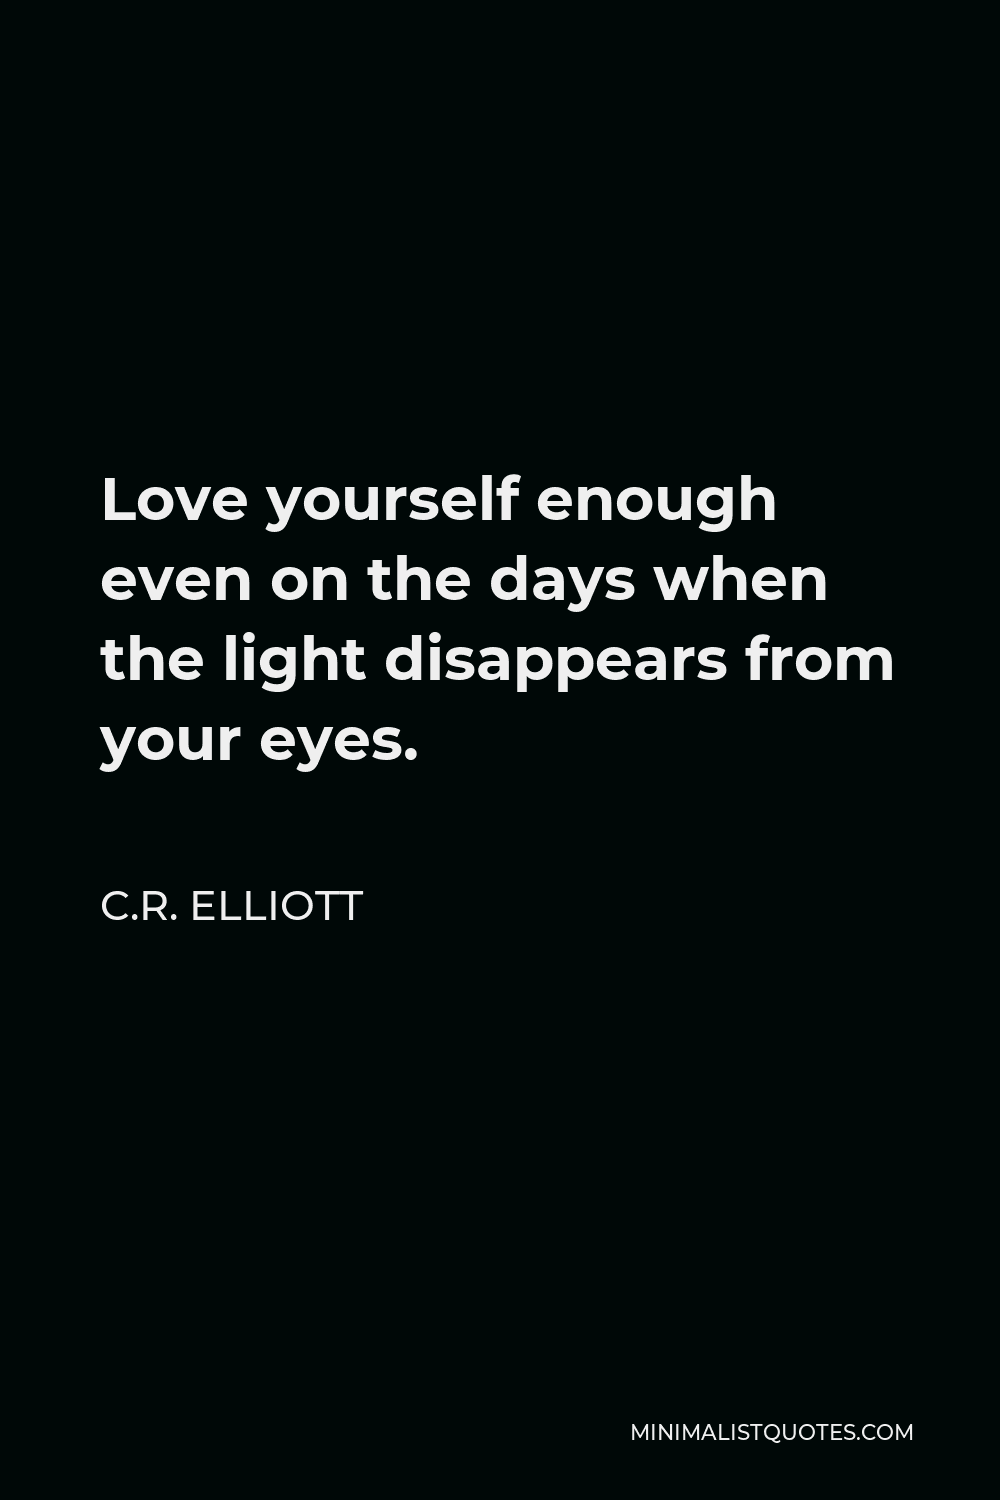 C.R. Elliott Quote - Love yourself enough even on the days when the light disappears from your eyes.